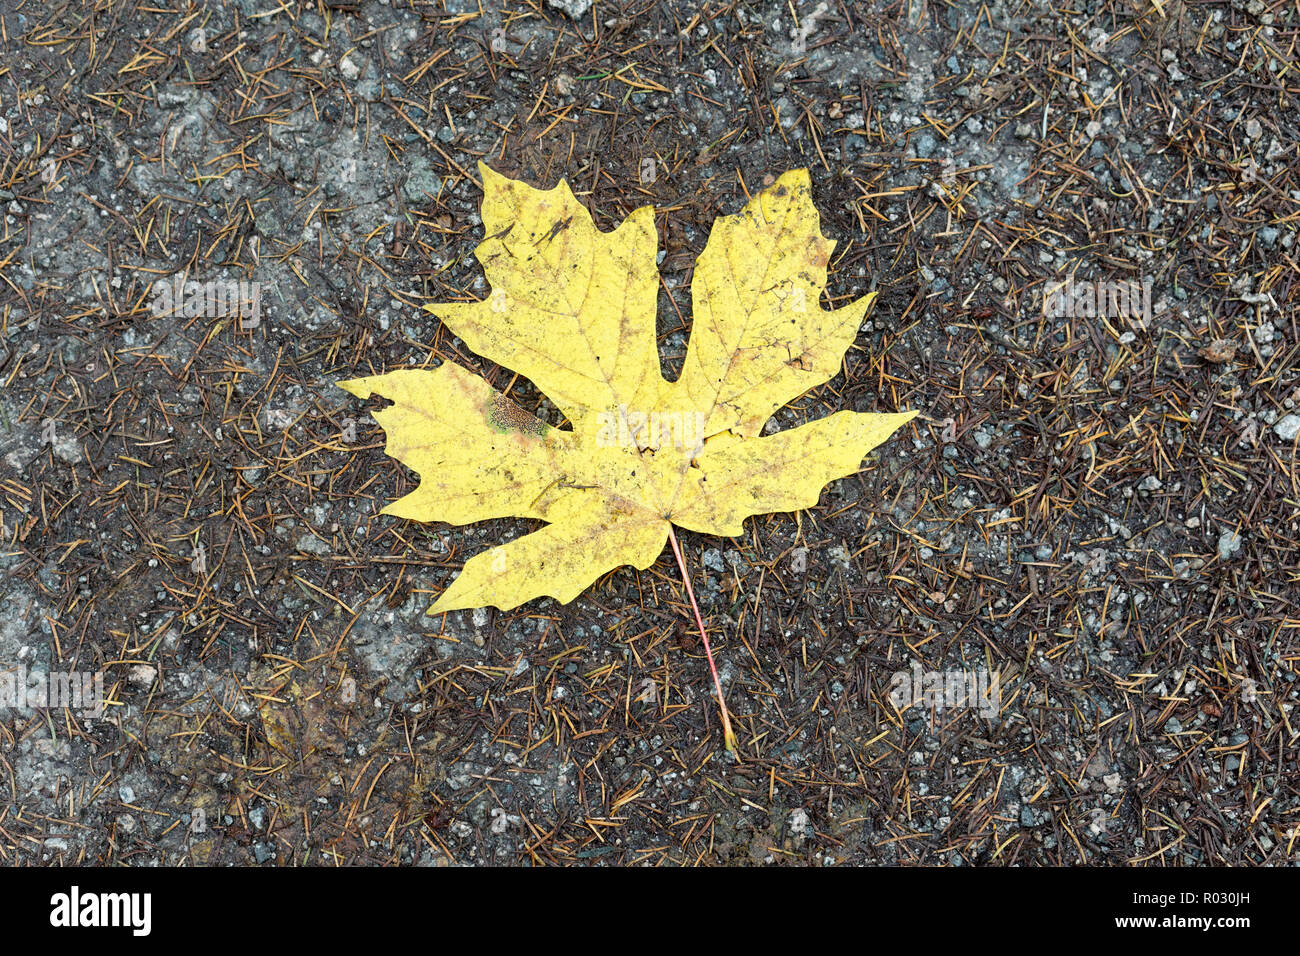 Close-up of a yellow bigleaf maple tree leaf lying on a trail  in Pacific Spirit Regional Park, Vancouver, BC, Canada Stock Photo